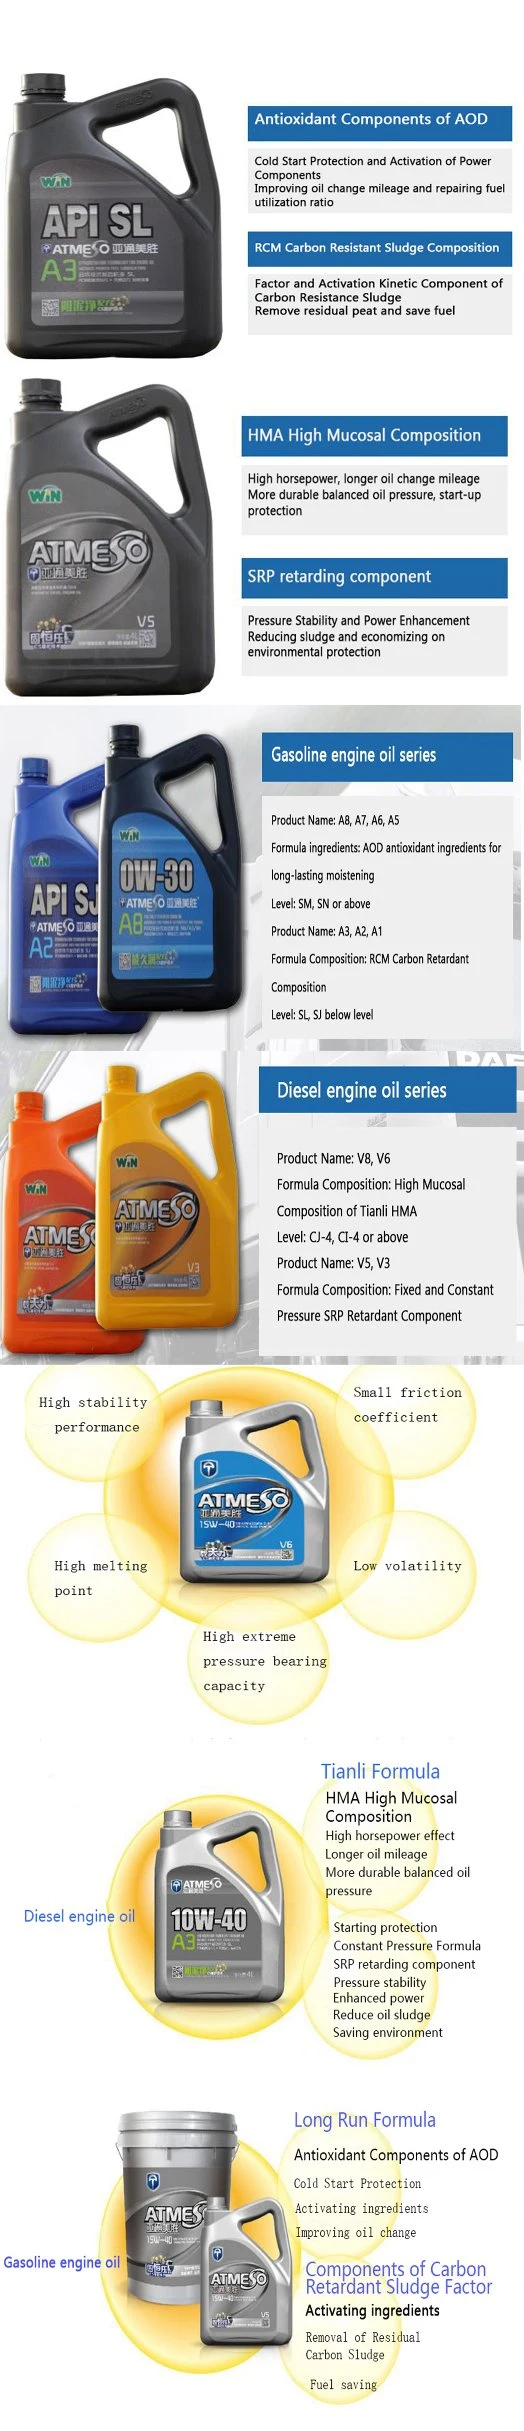 API Sj Synthetic Engine Lubricants Dky066